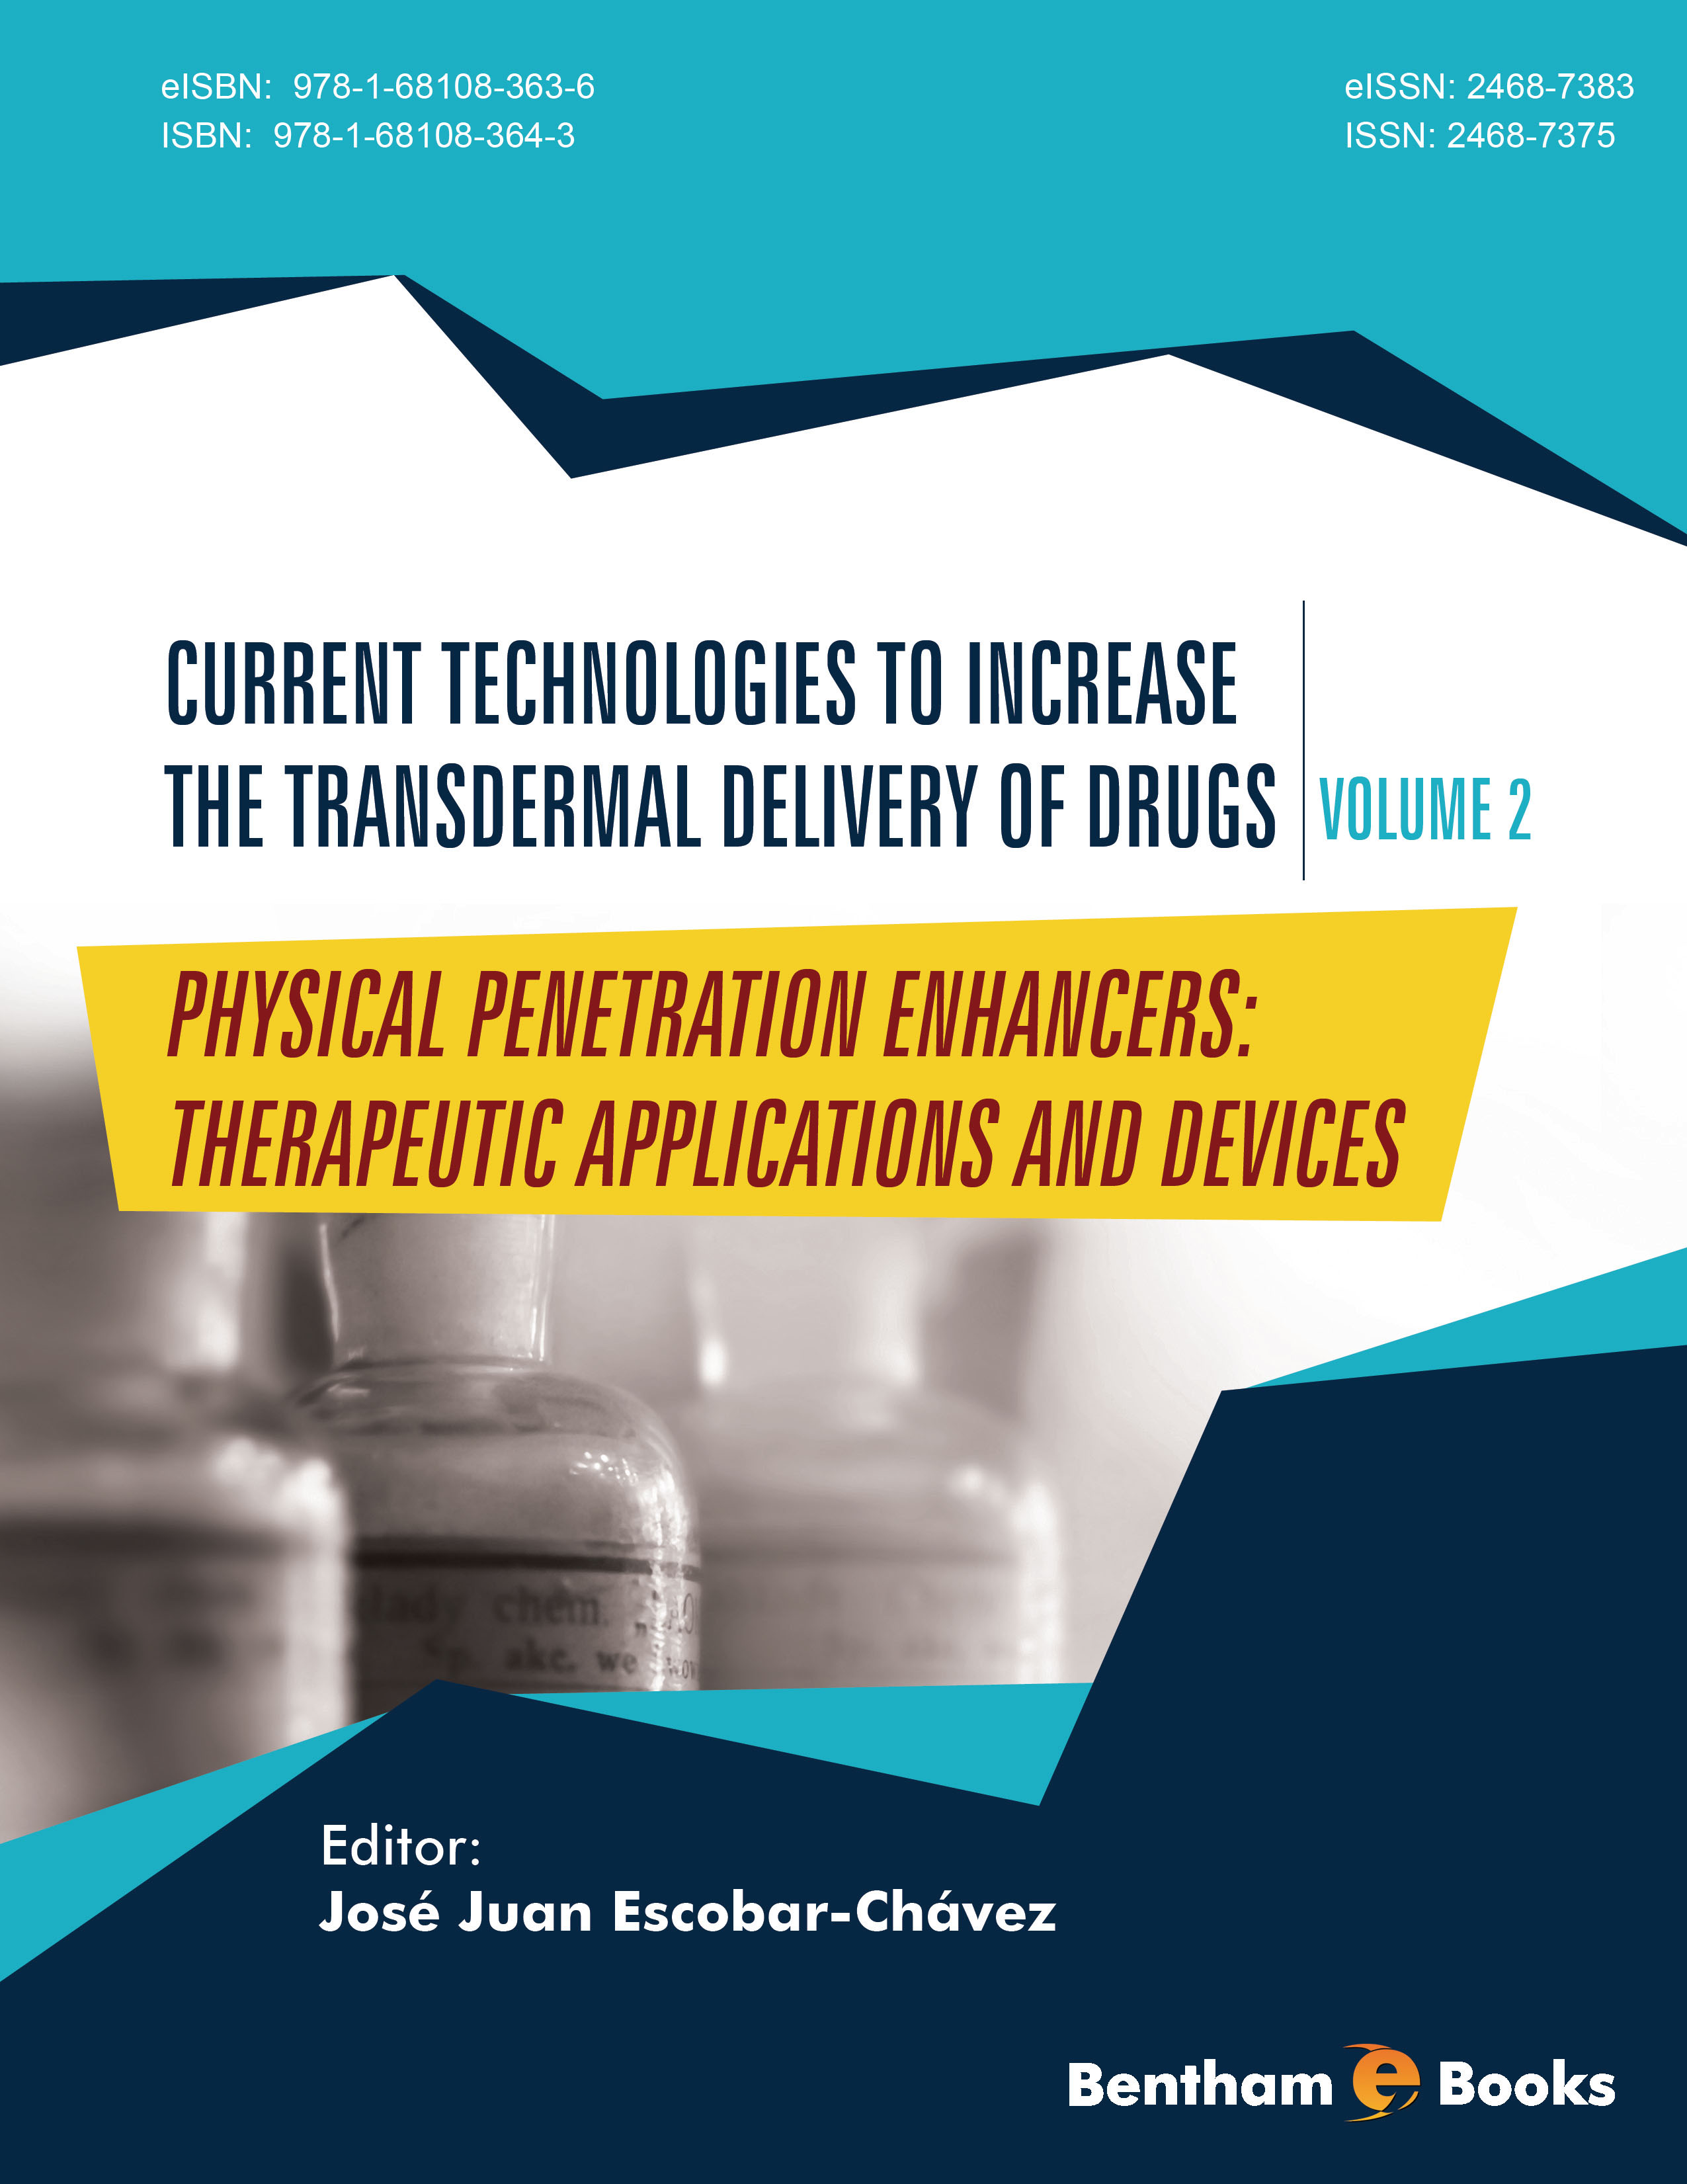 Physical Penetration Enhancers: Therapeutic Applications and Devices